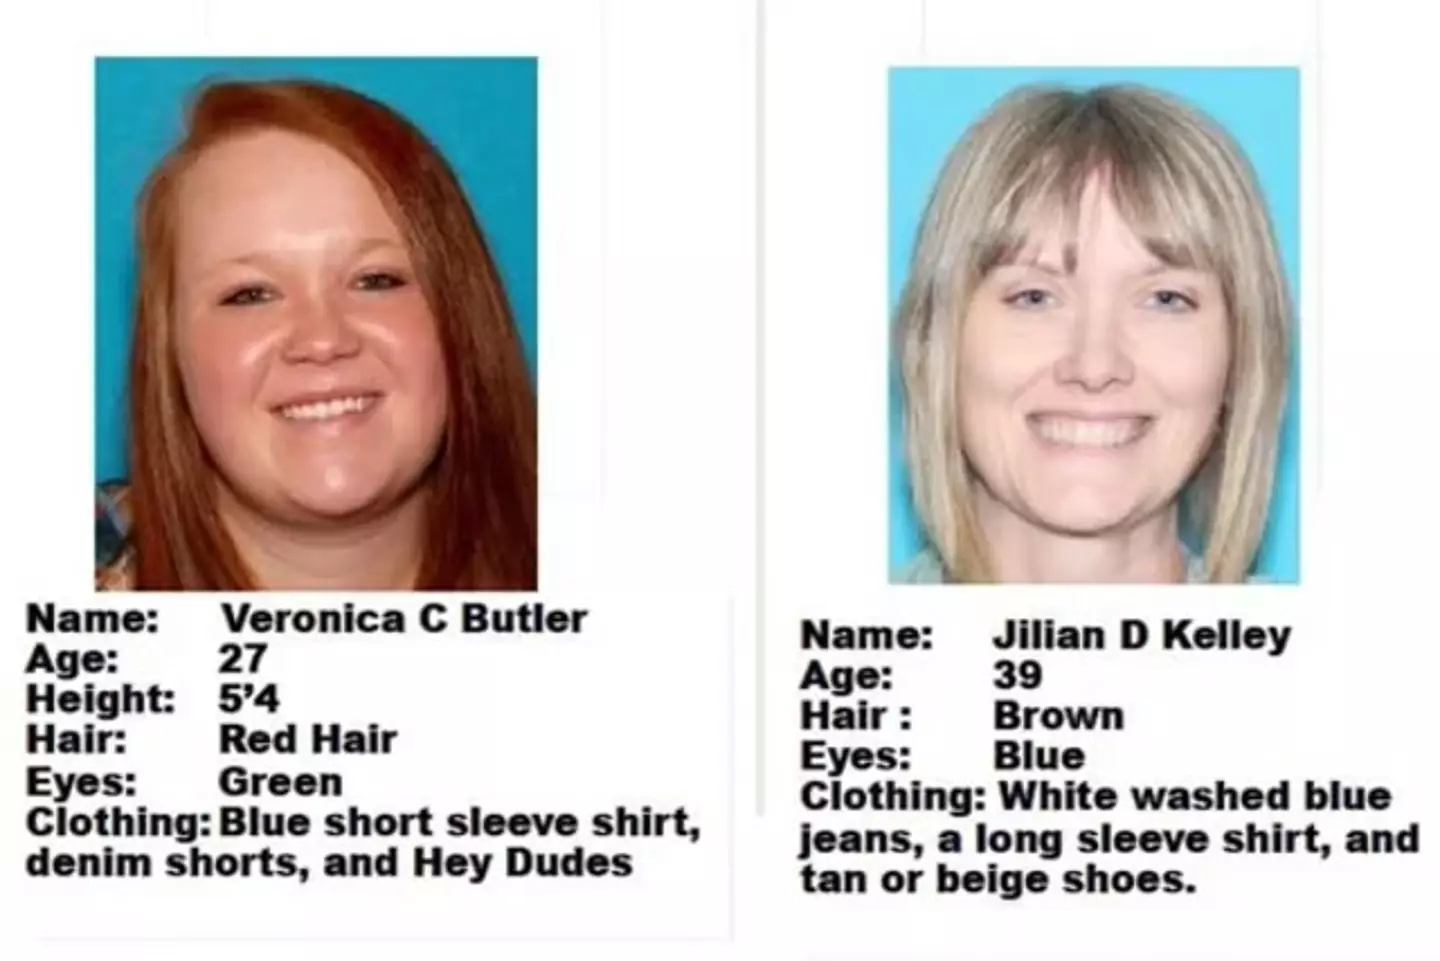 Both women have been missing since March 30.